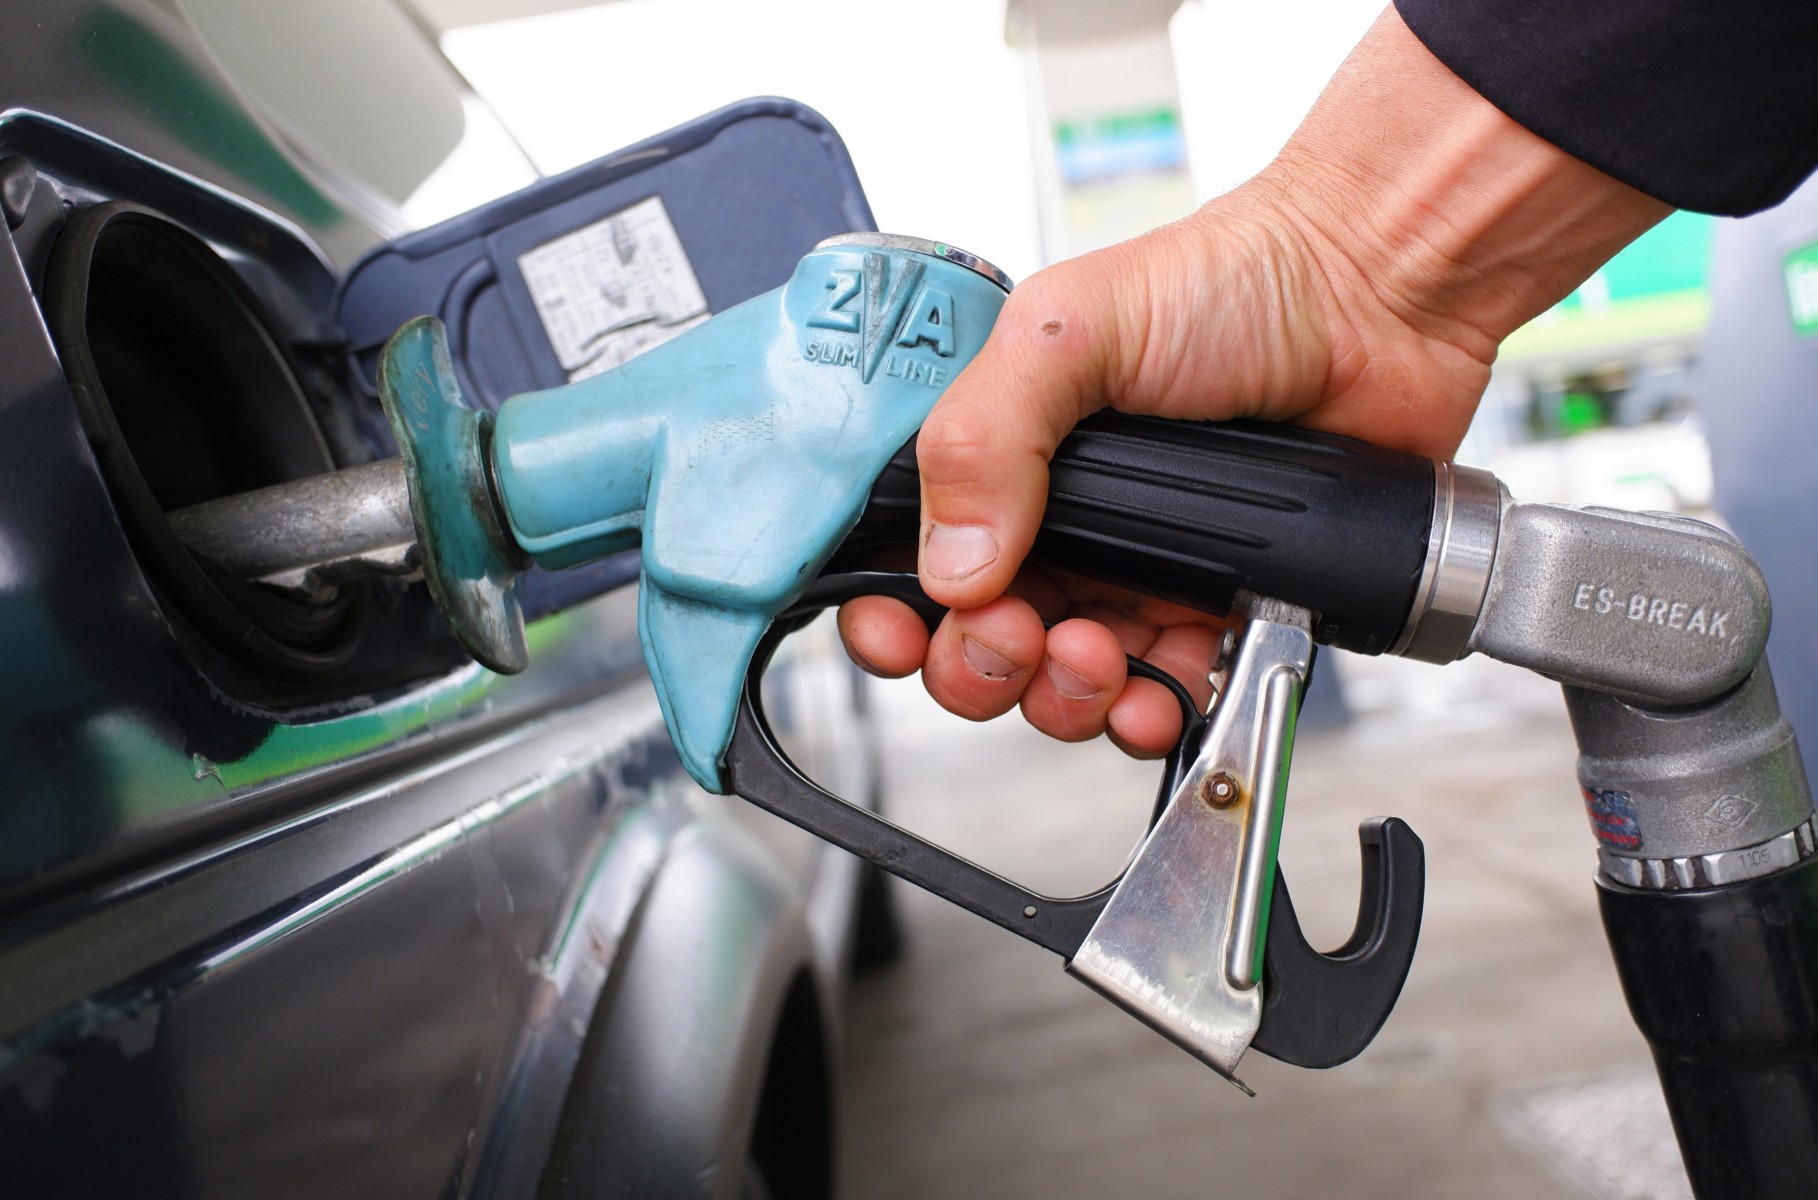 Petrol and diesel could rise by 2p per litre from April if there is a hike in fuel duty